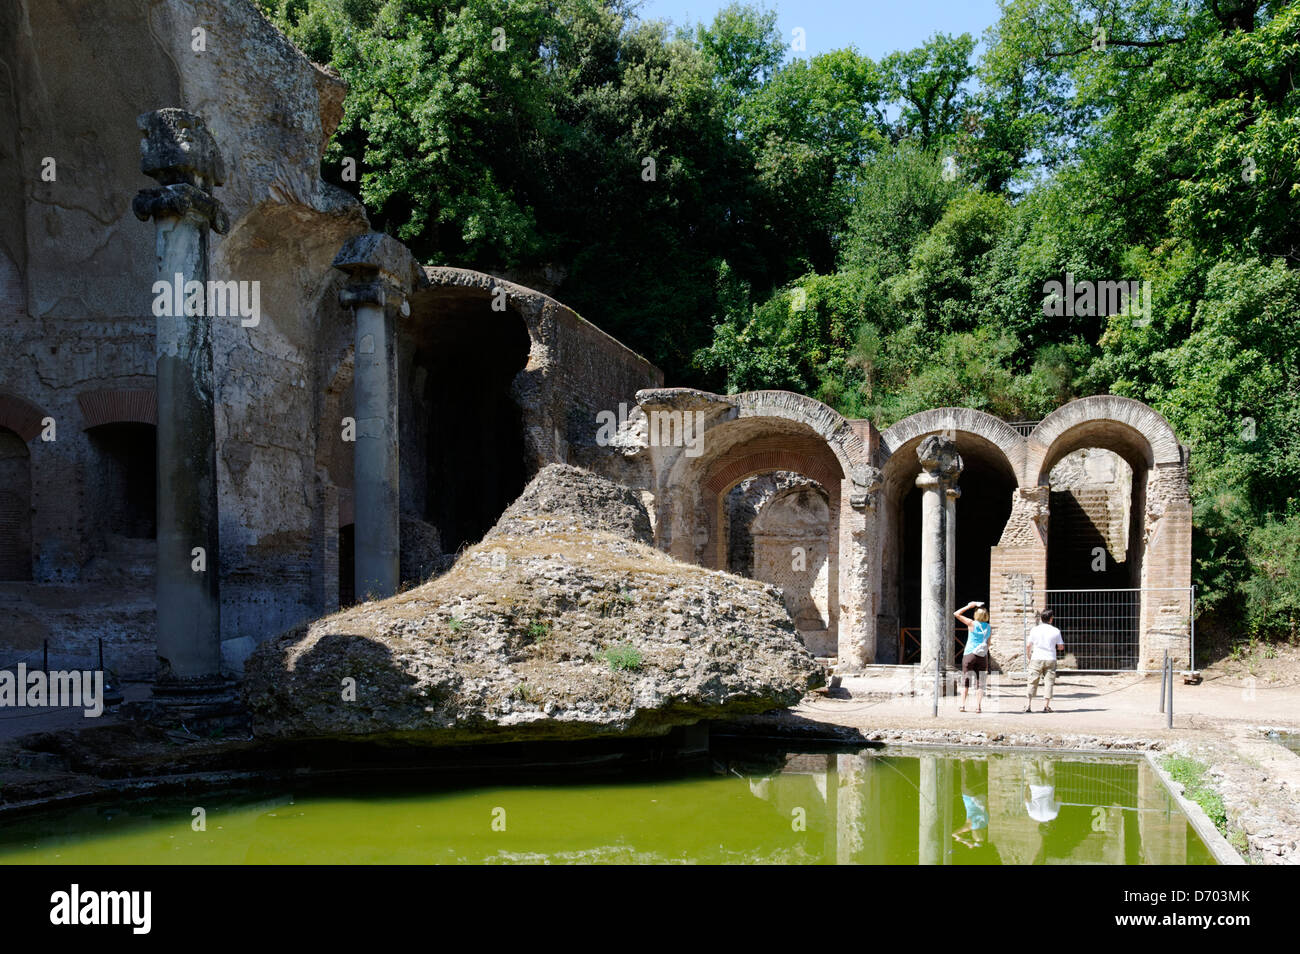 Villa Adriana. Tivoli. Italy. View at the Canopus south end of the basin that collected water from the Canopus fountains. In the Stock Photo